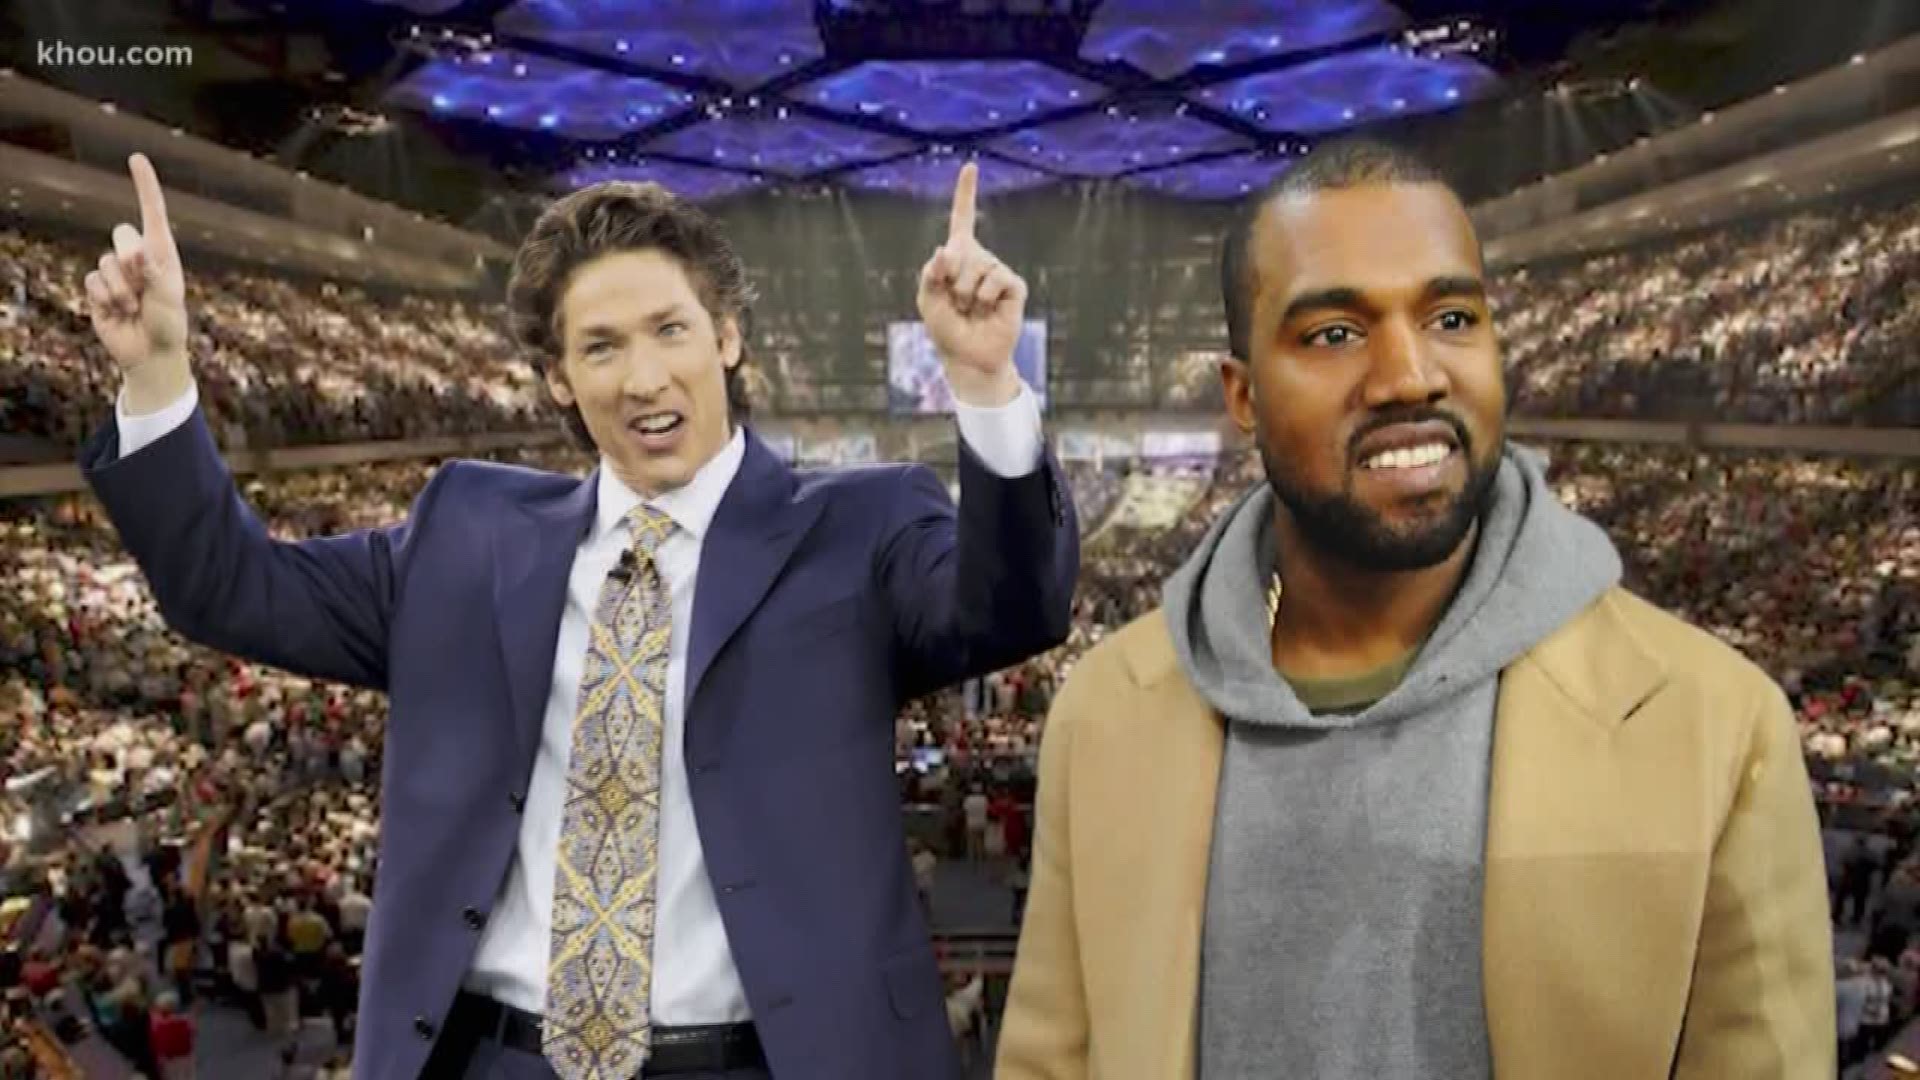 Kanye West is scheduled to visit Lakewood Church on Sunday, November 17 for the 11 a.m. service. He will take the stage with Pastor Joel Osteen early in the service.